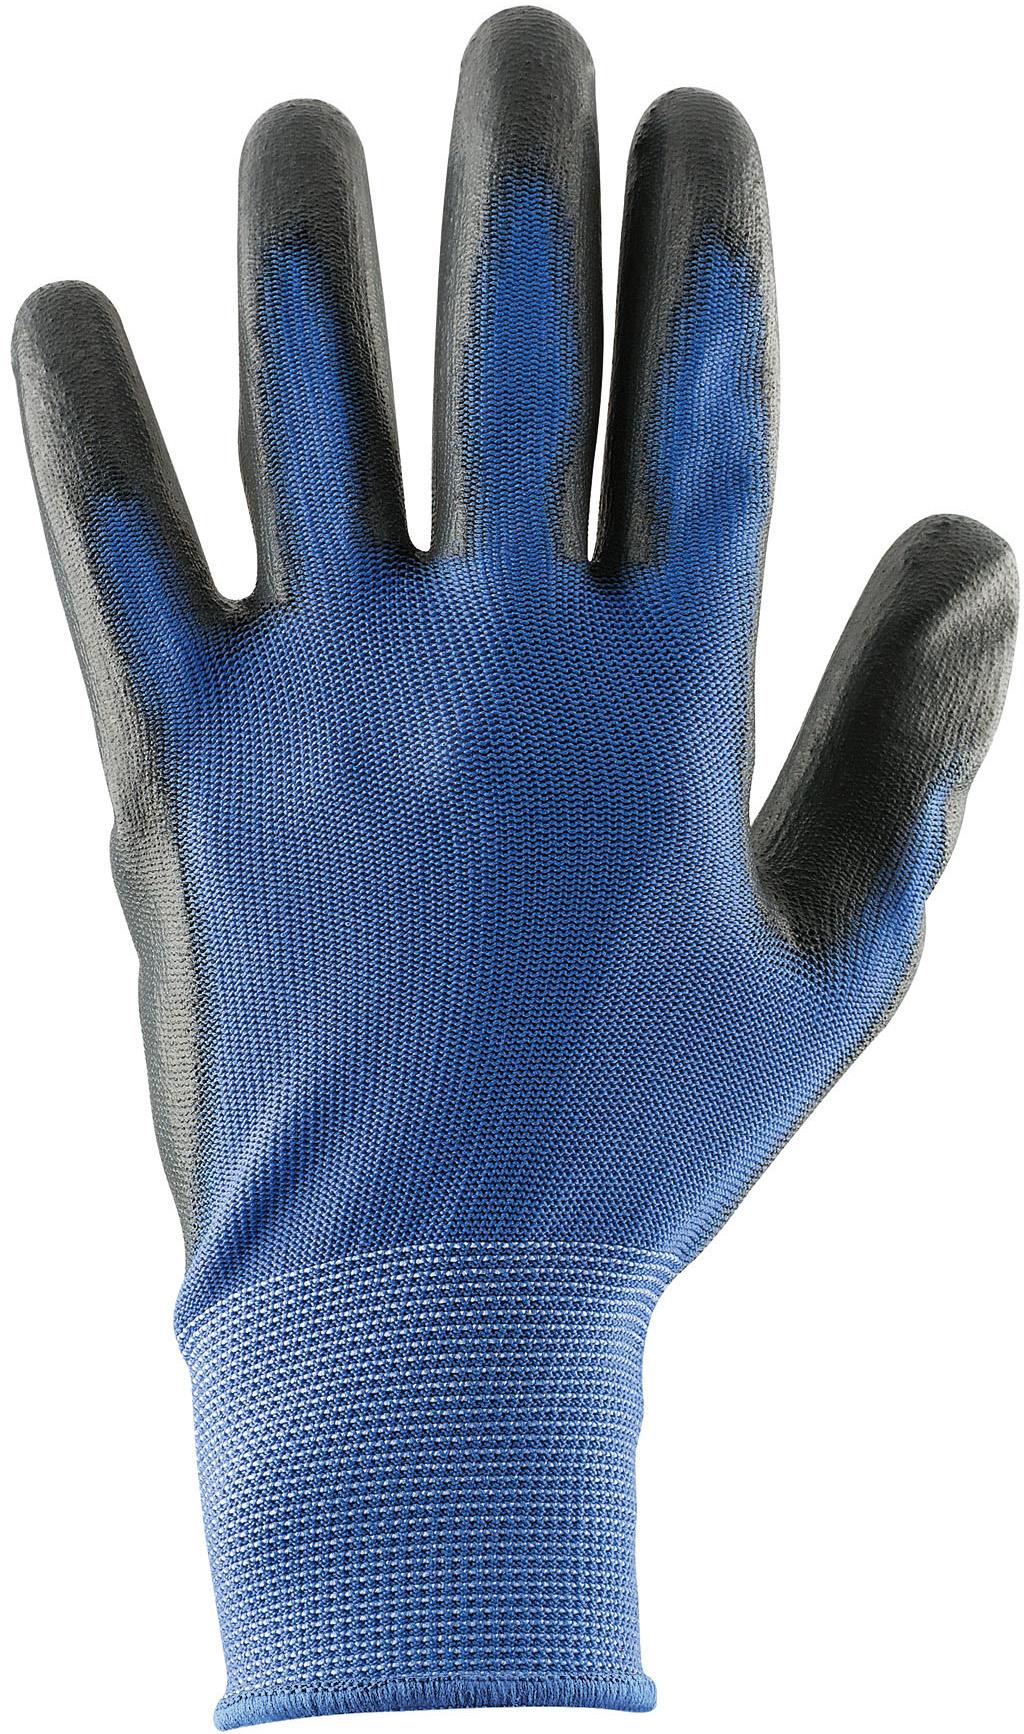 Draper Screen Touch Gloves - X Large